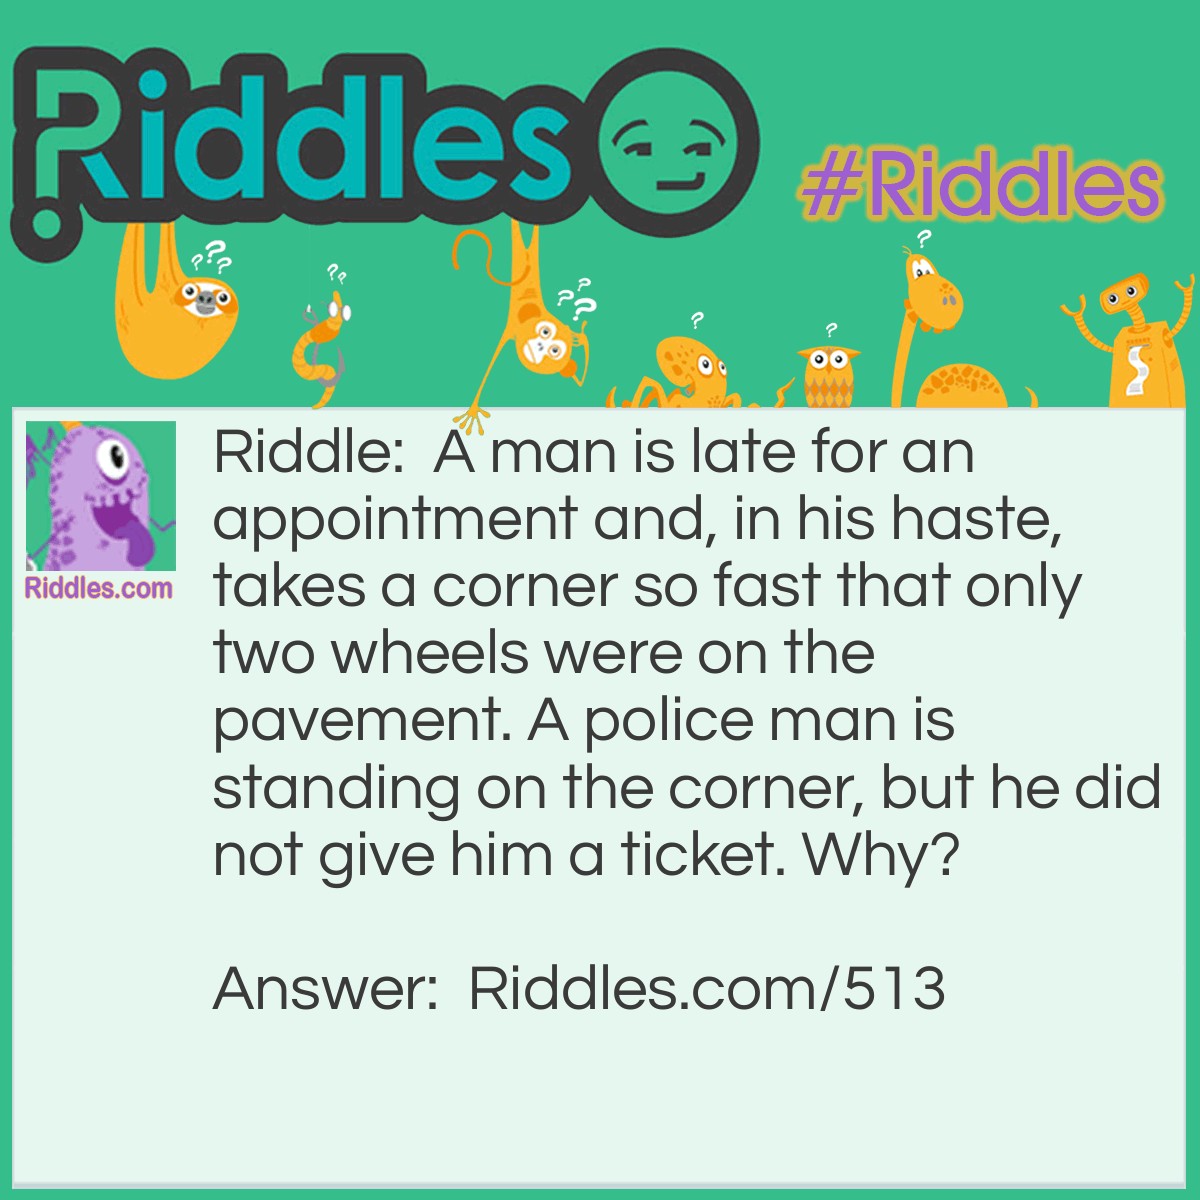 Riddle: A man is late for an appointment and, in his haste, takes a corner so fast that only two wheels were on the pavement. A policeman is standing on the corner, but he did not give him a ticket. Why? Answer: He was on a motorcycle.